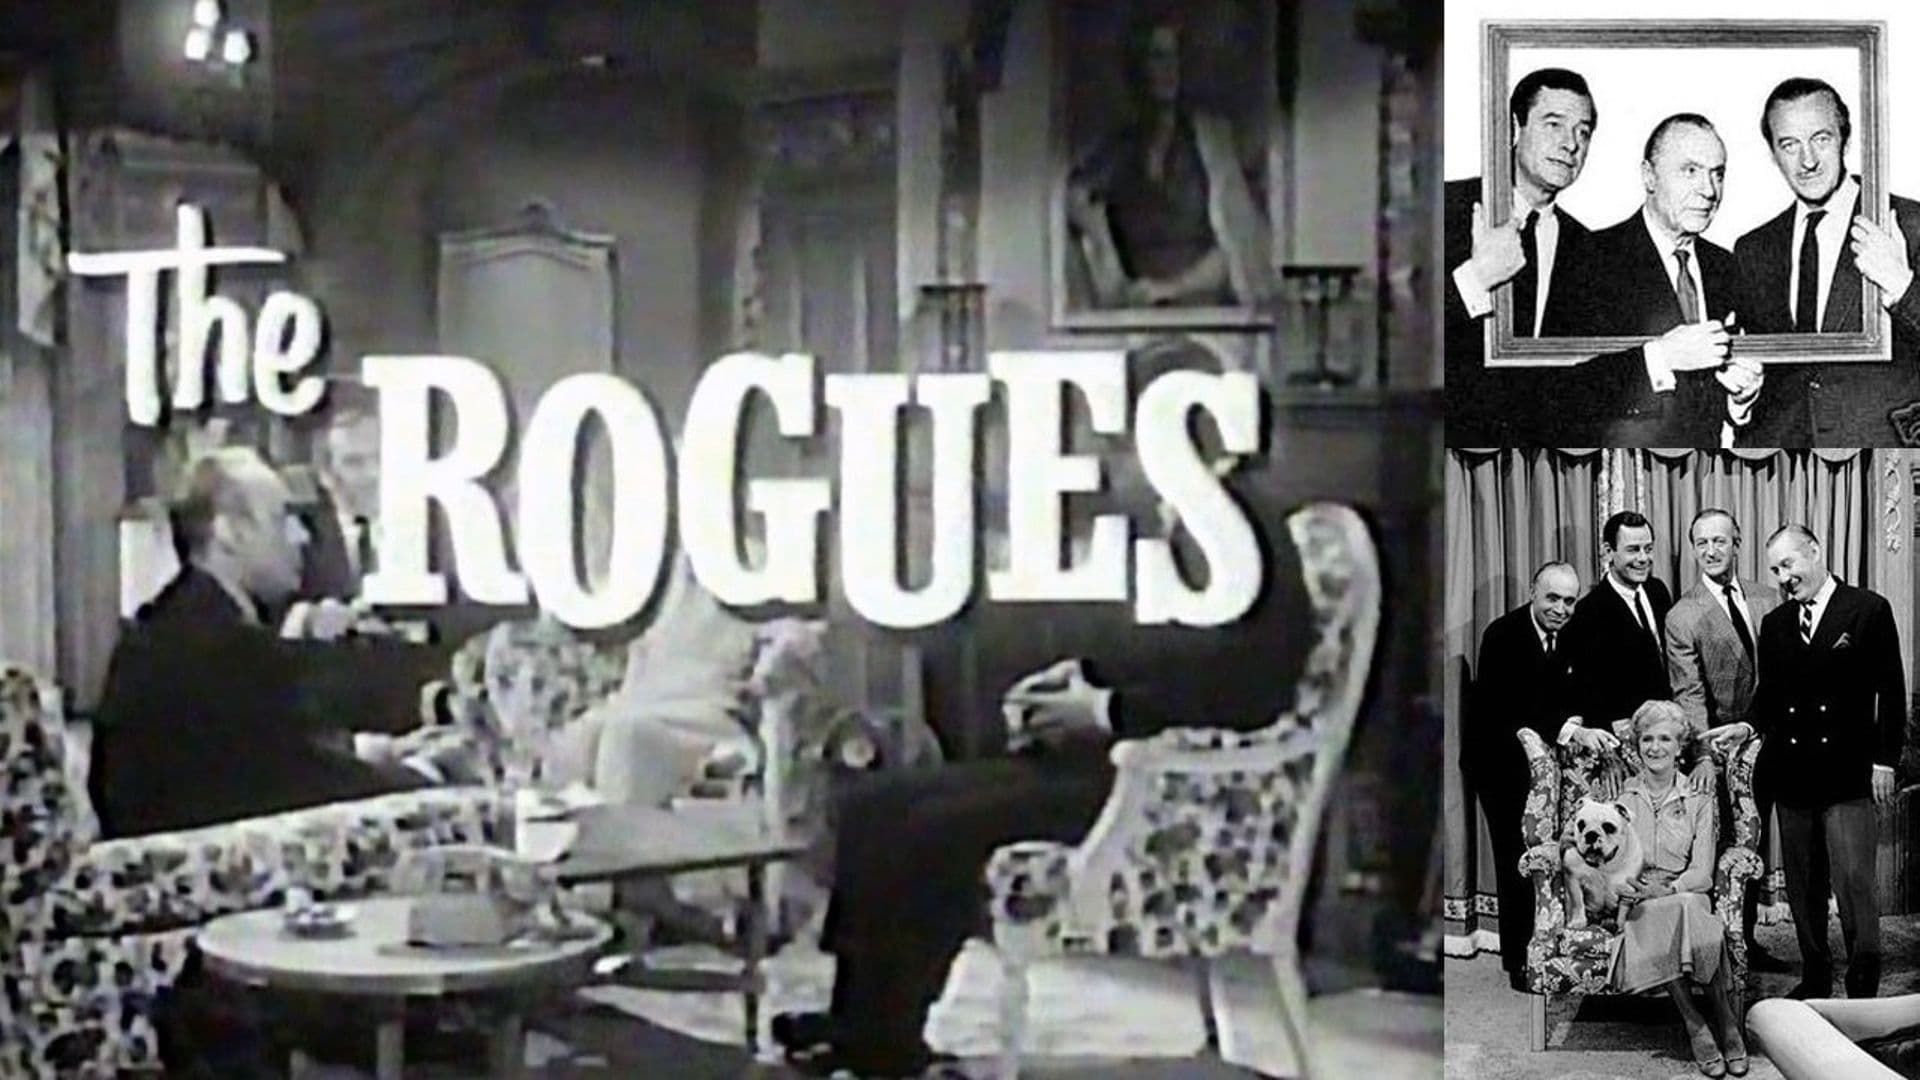 The Rogues background